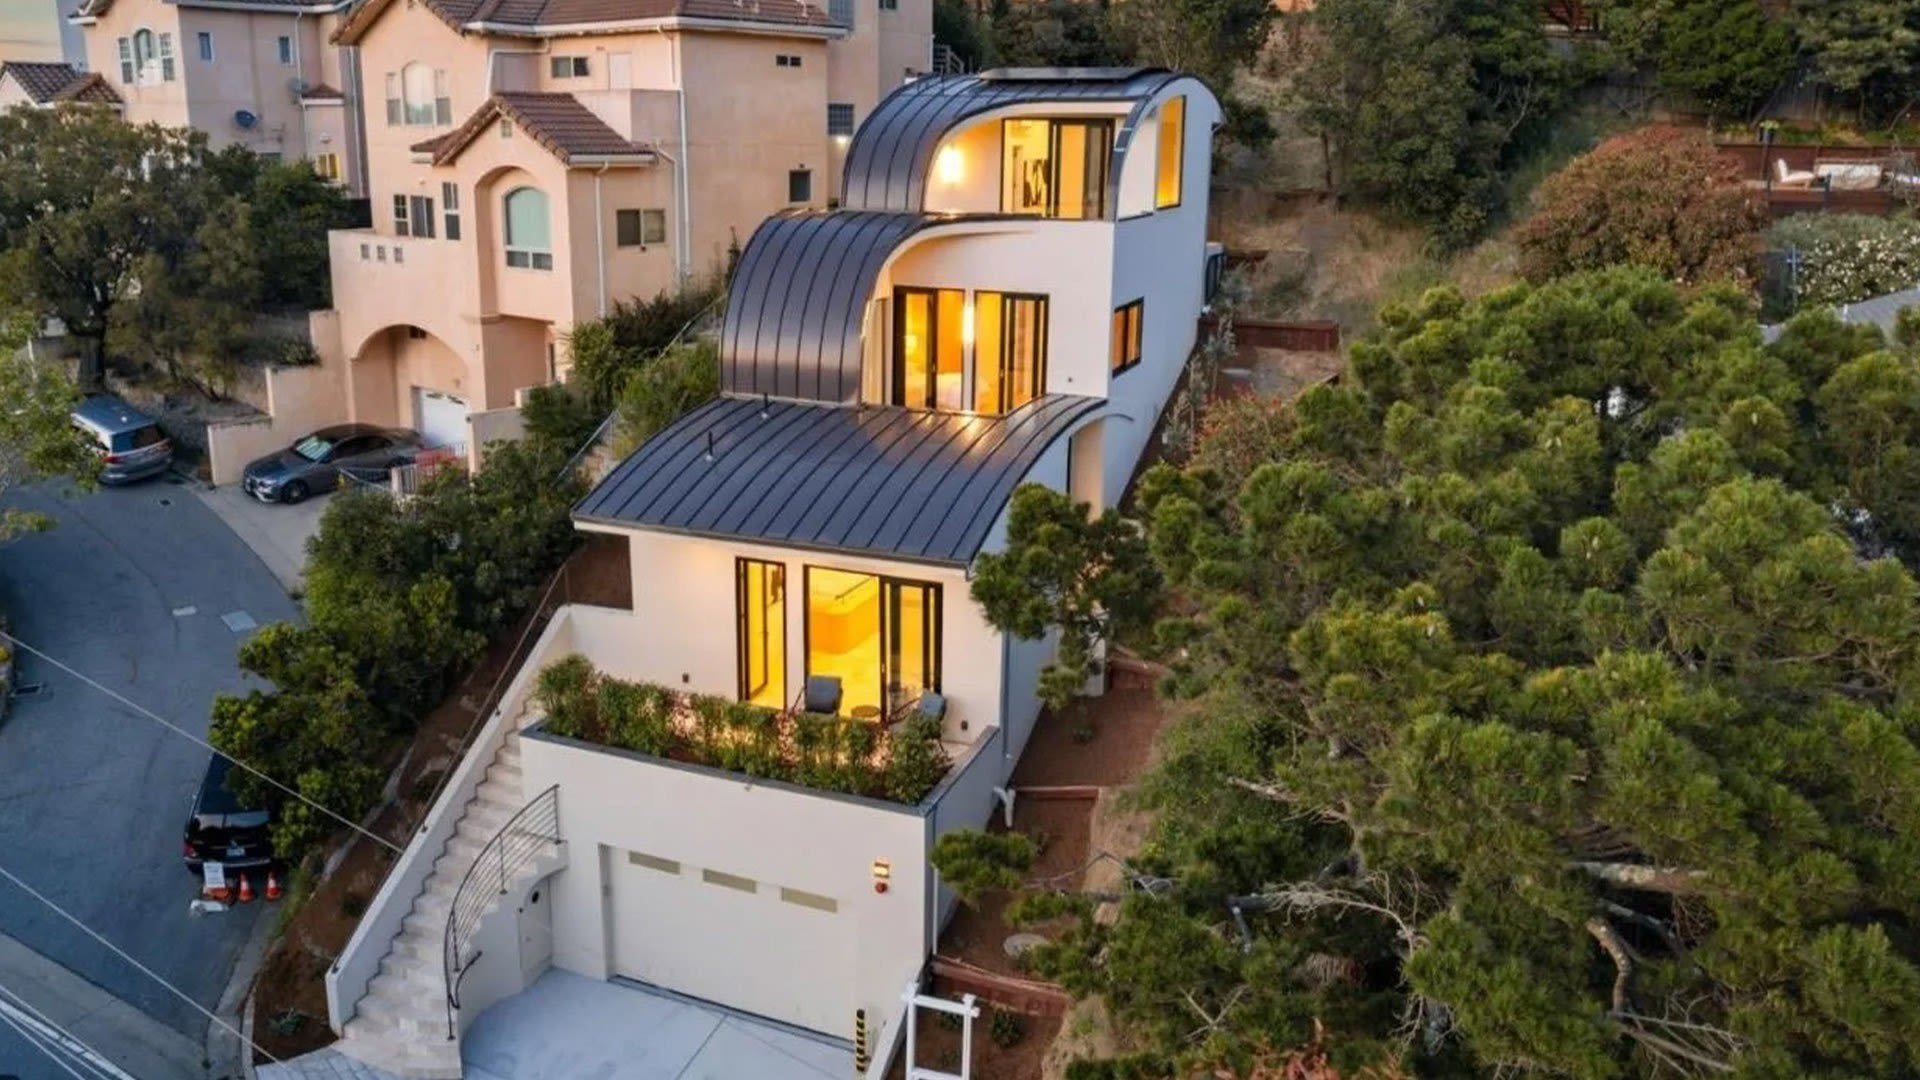 Curvy Roofed Eco-Home in the San Francisco Bay Area Sweeps Onto the Market for $2.75M